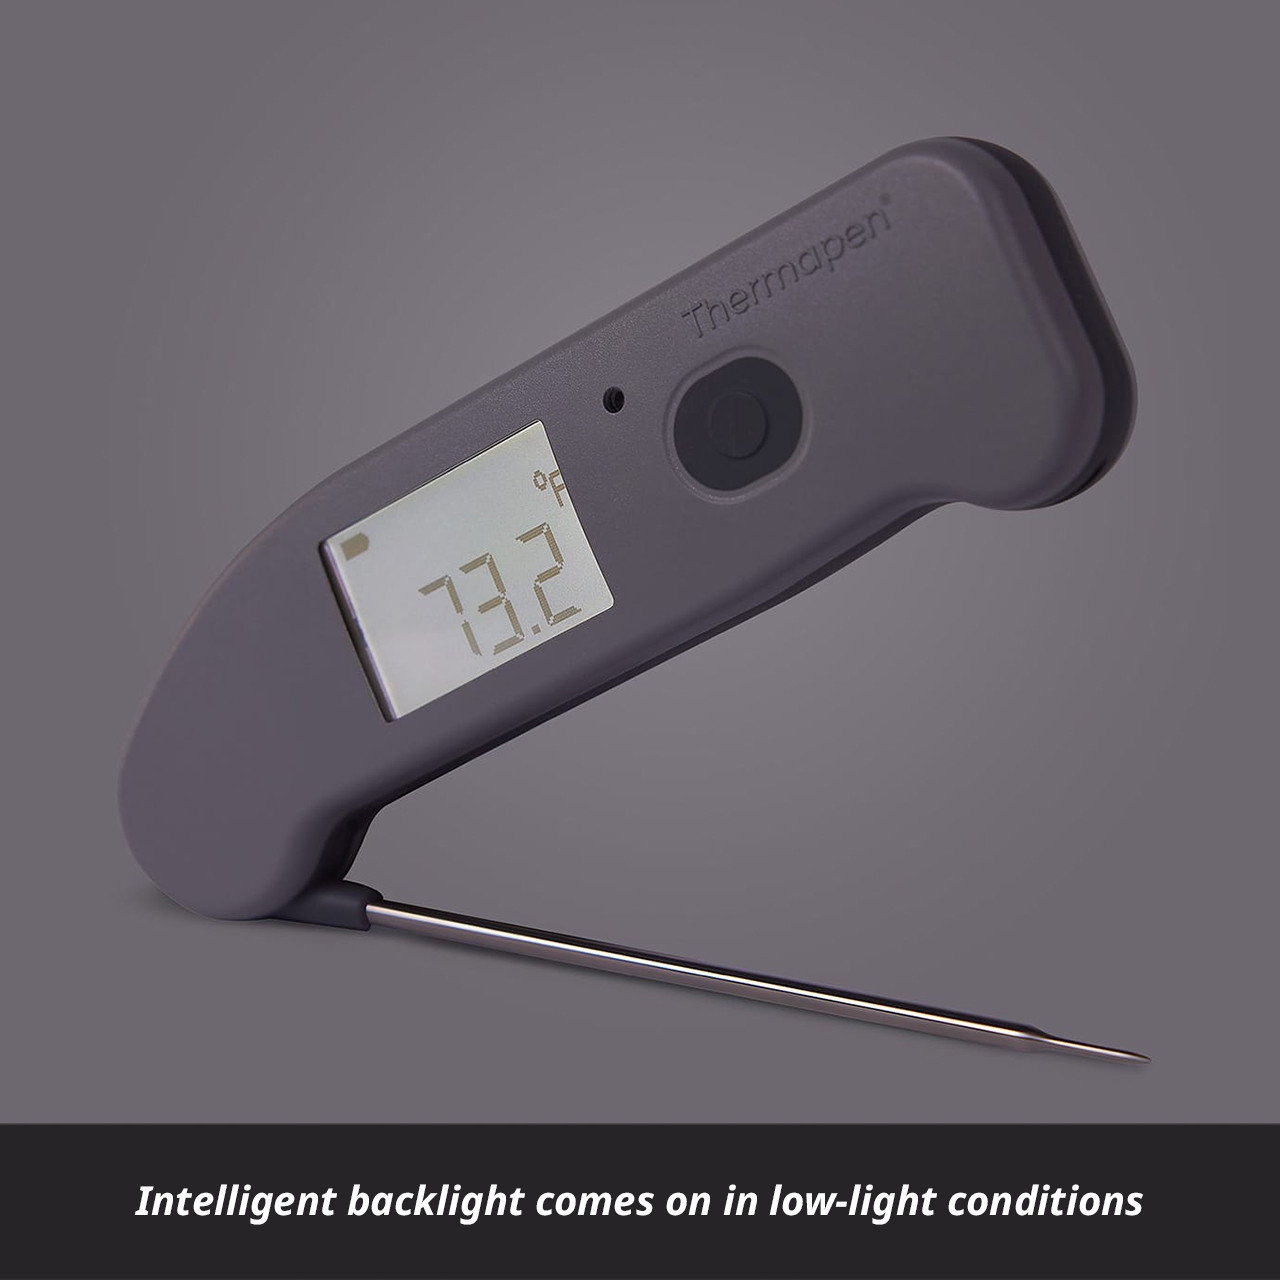 https://cdn11.bigcommerce.com/s-2mj19jirgg/images/stencil/1280x1280/products/1146/3446/Thermapen-One-Blue_020-backlight__33143.1695739384.jpg?c=1